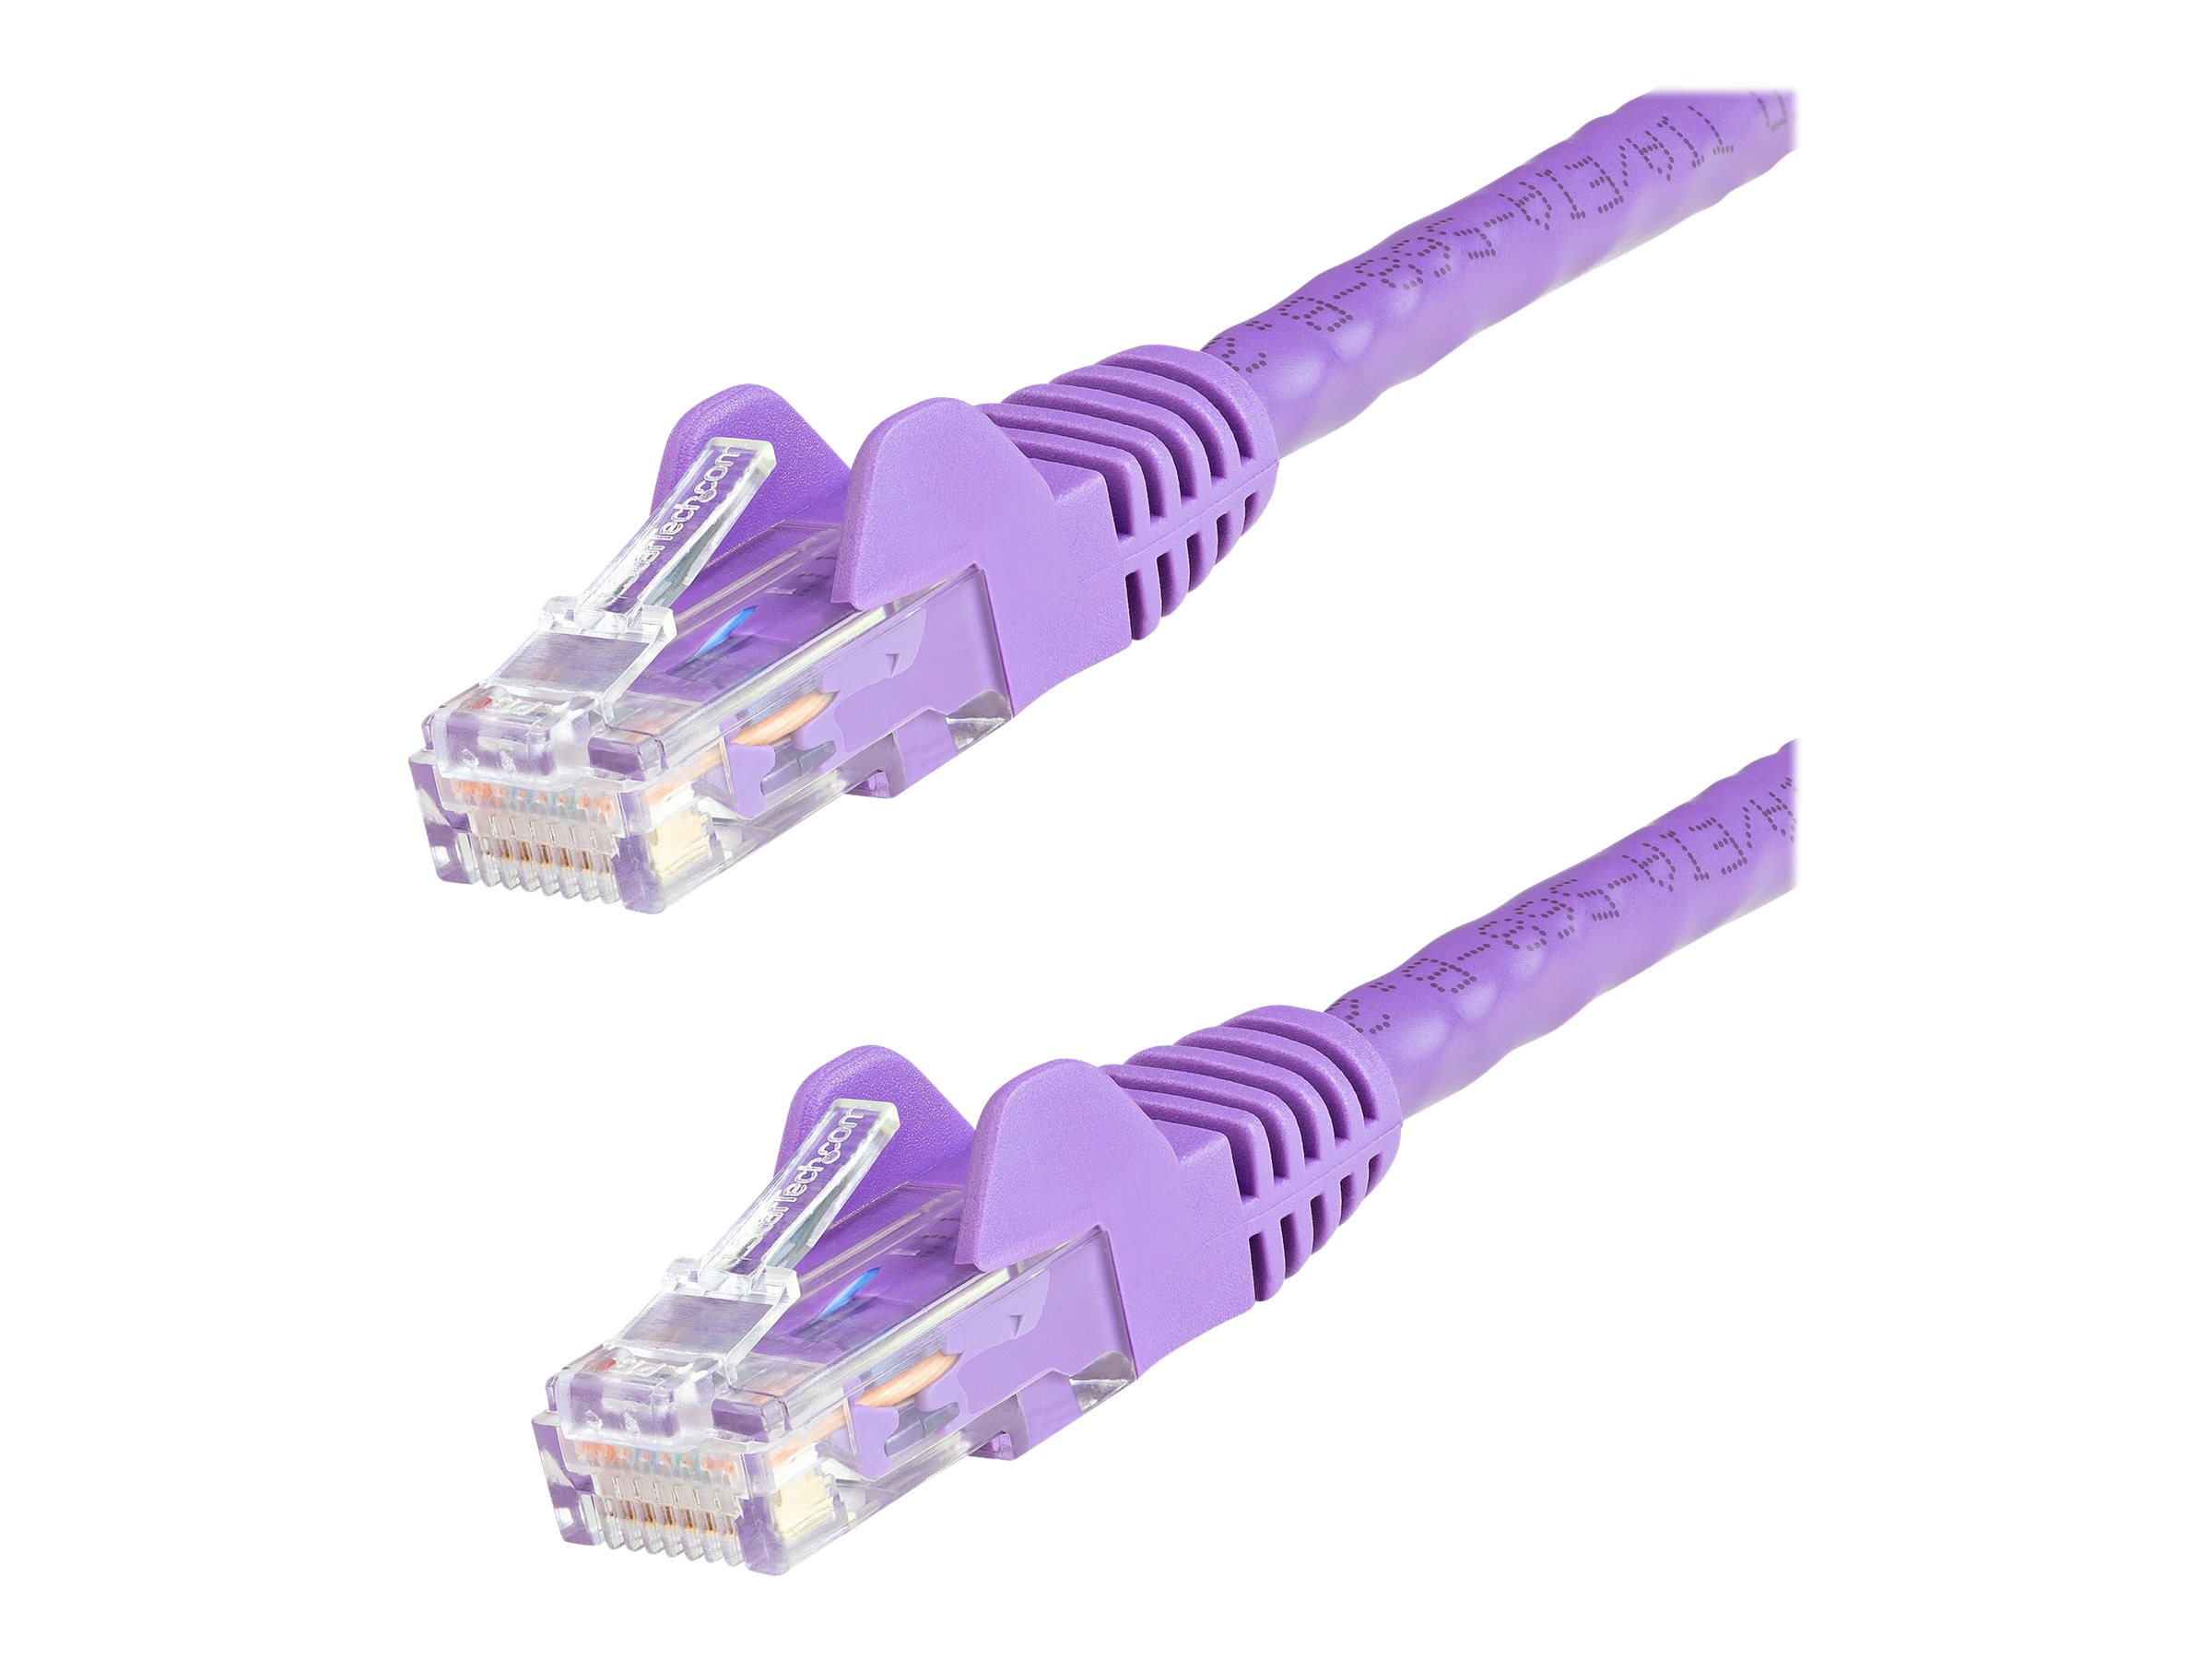 StarTech.com 25ft CAT6 Cable, 10 Gigabit Snagless RJ45 650MHz 100W PoE Cat 6 Patch Cord, 10GbE UTP CAT6 Network...